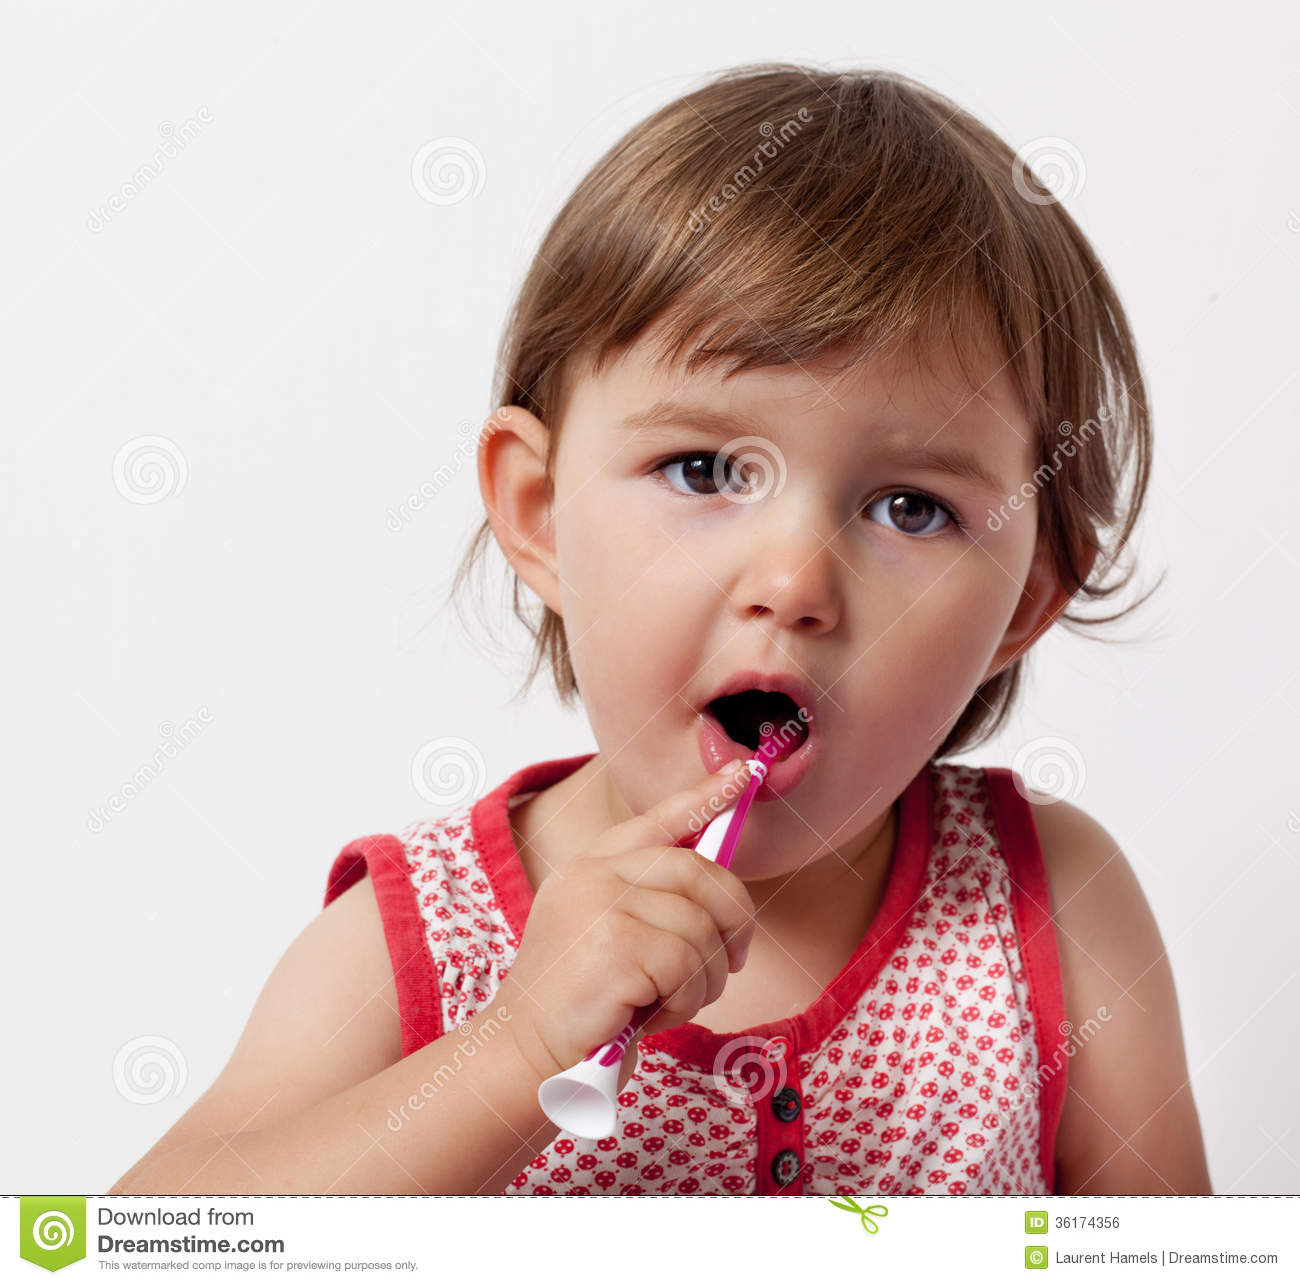 Baby Learning To Care About Her Teeth With Toothbrush Royalty Free